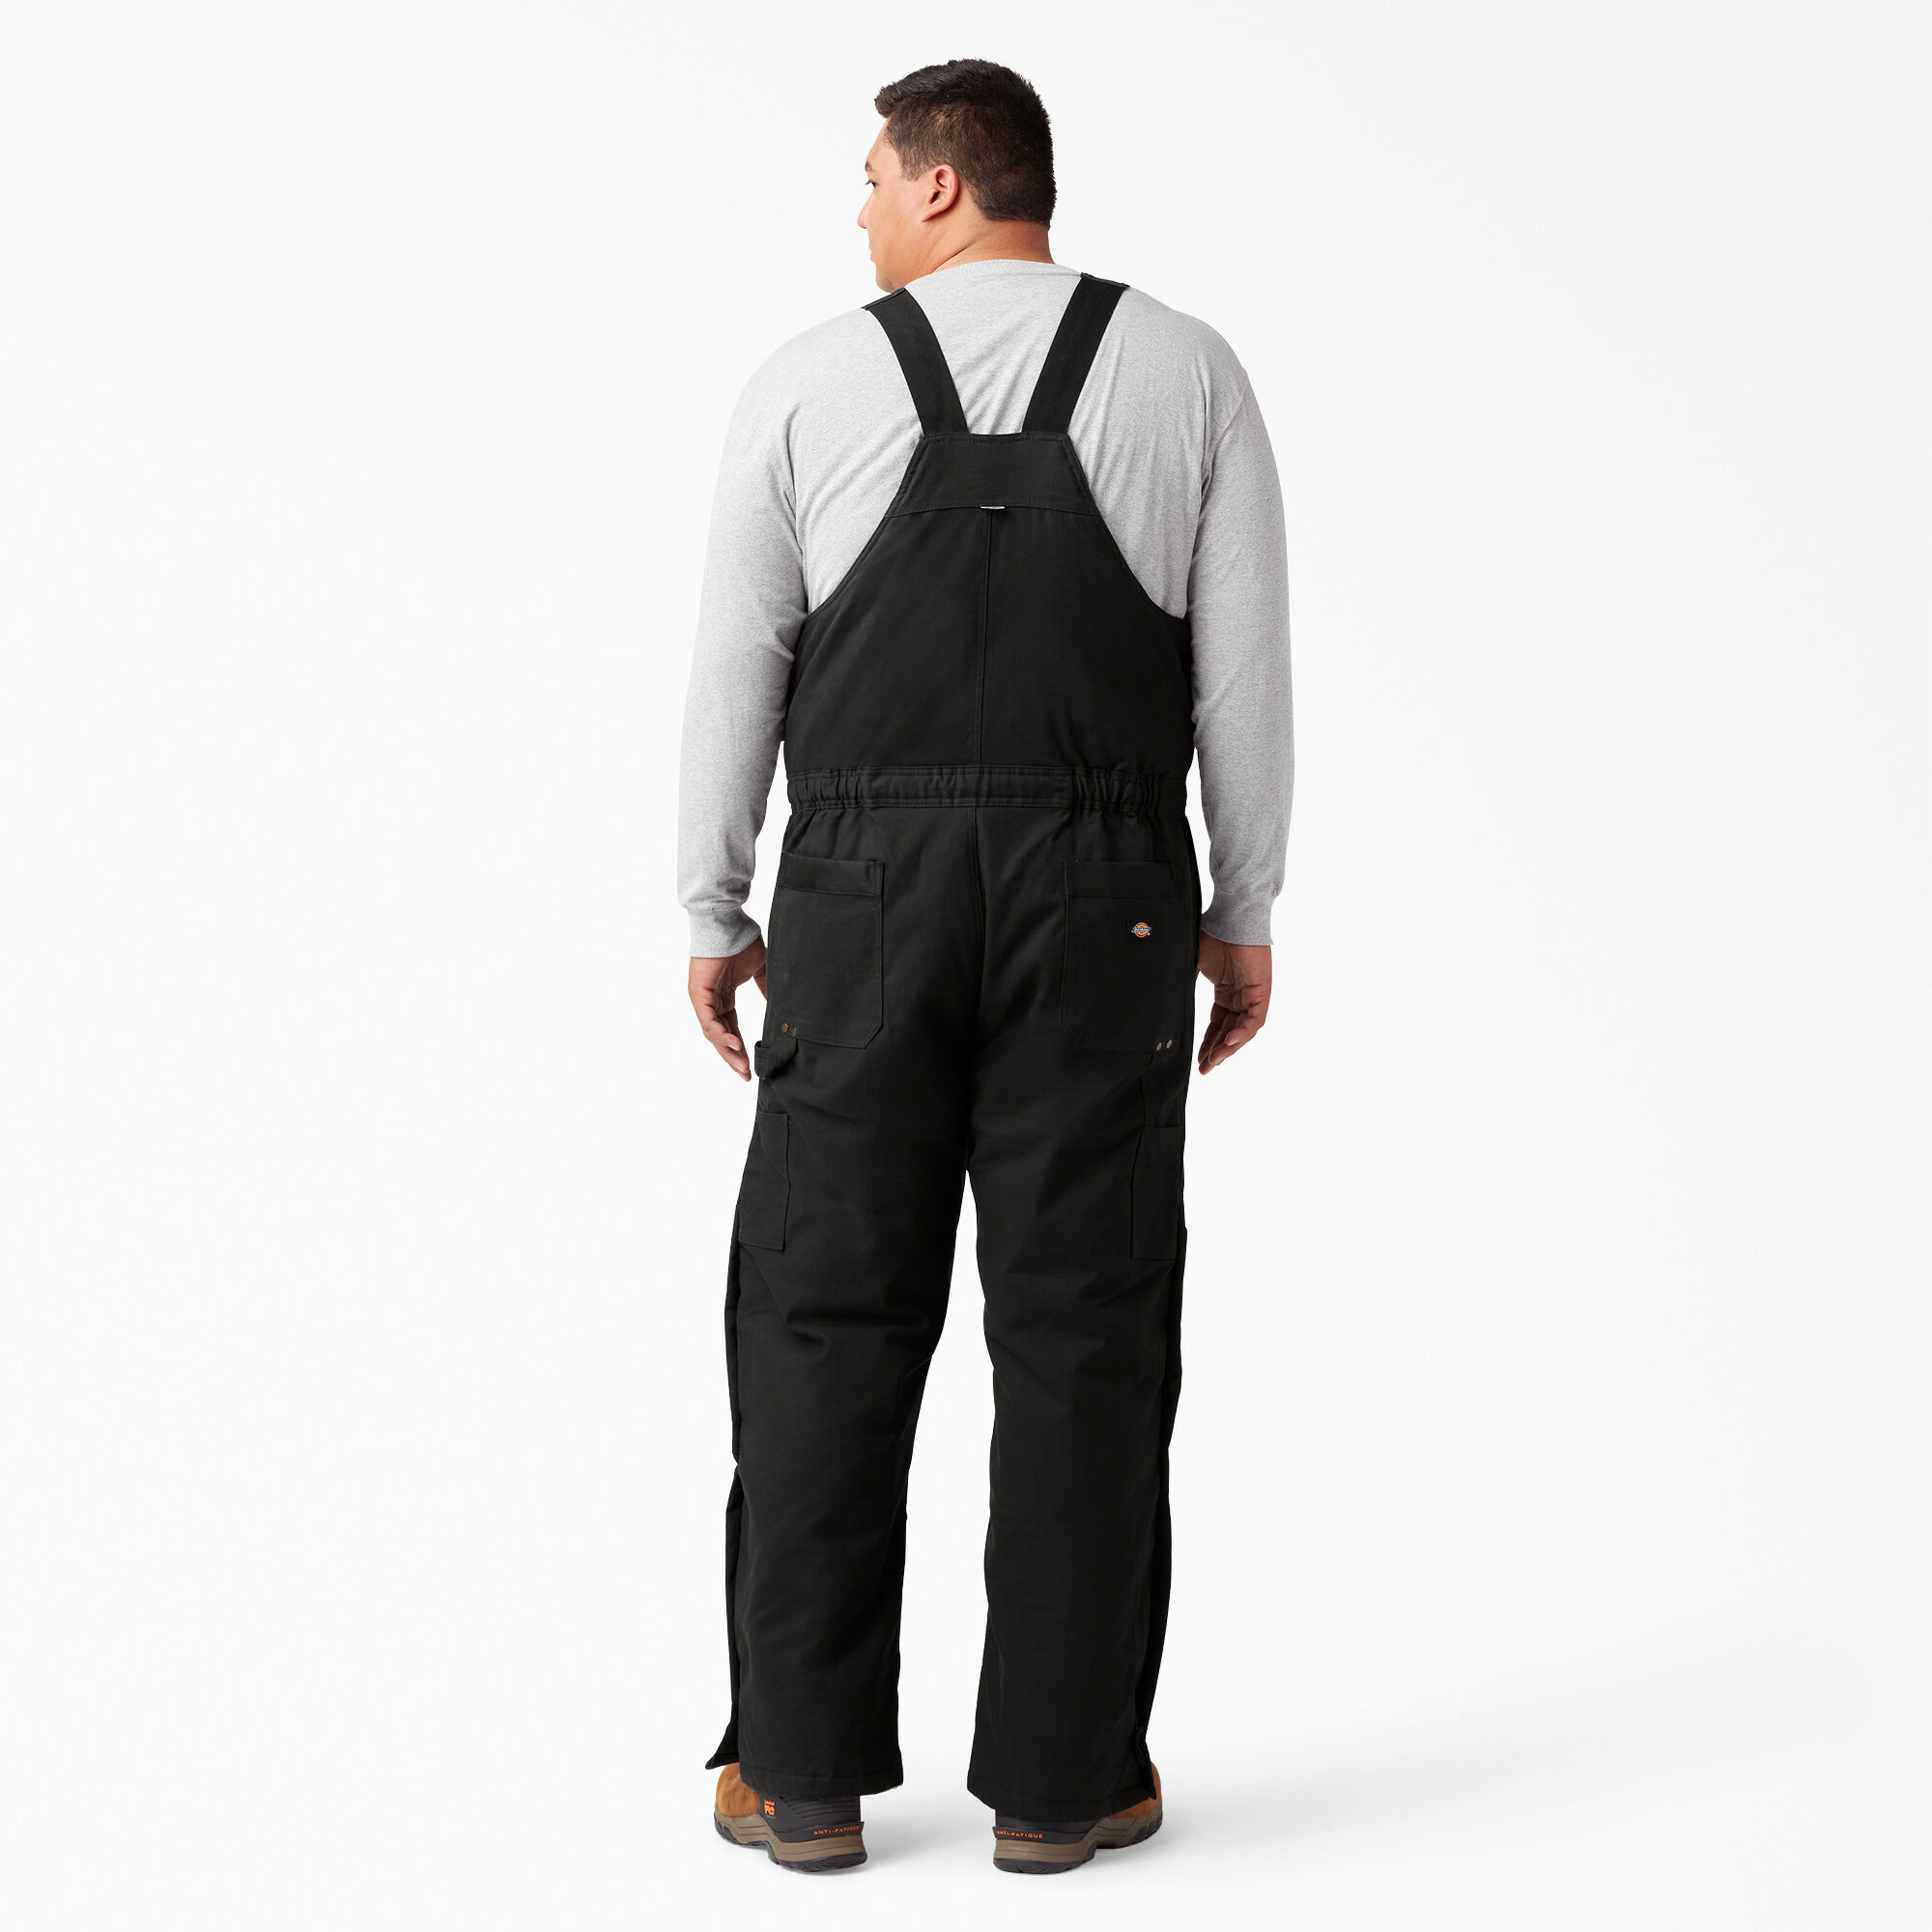 Visiter la boutique DickiesDickies Flex Duck Mobility Bib Overall Salopette Homme 